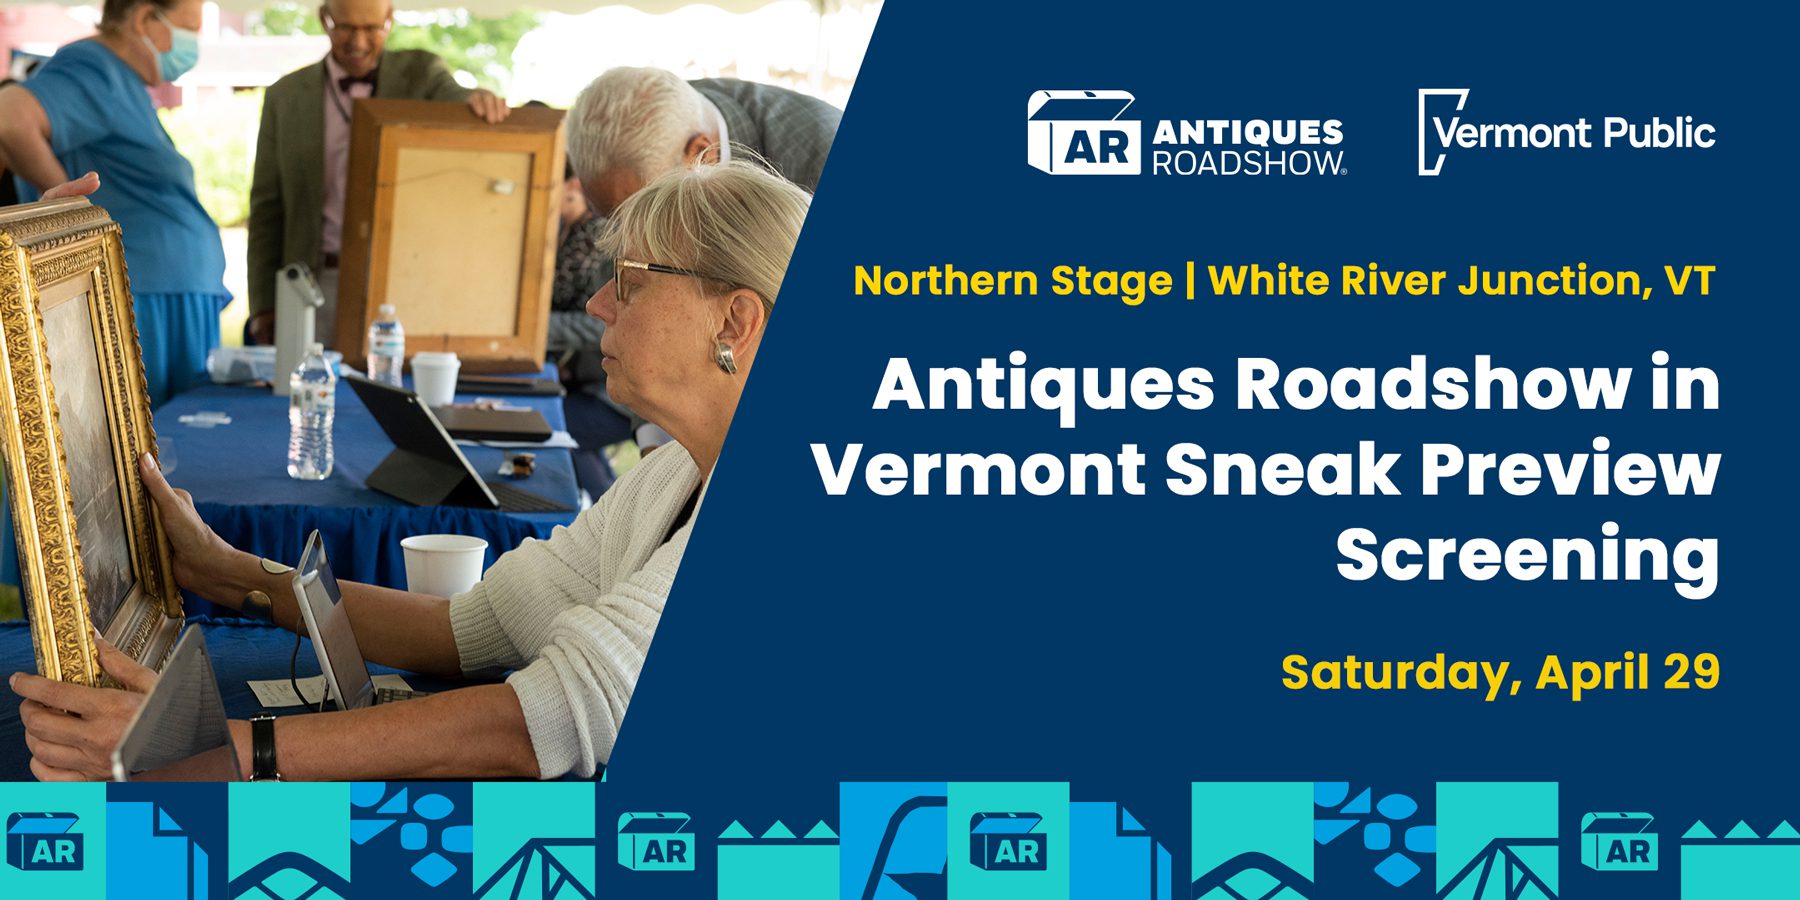 Antiques Roadshow in Vermont Sneak Preview – White River Junction